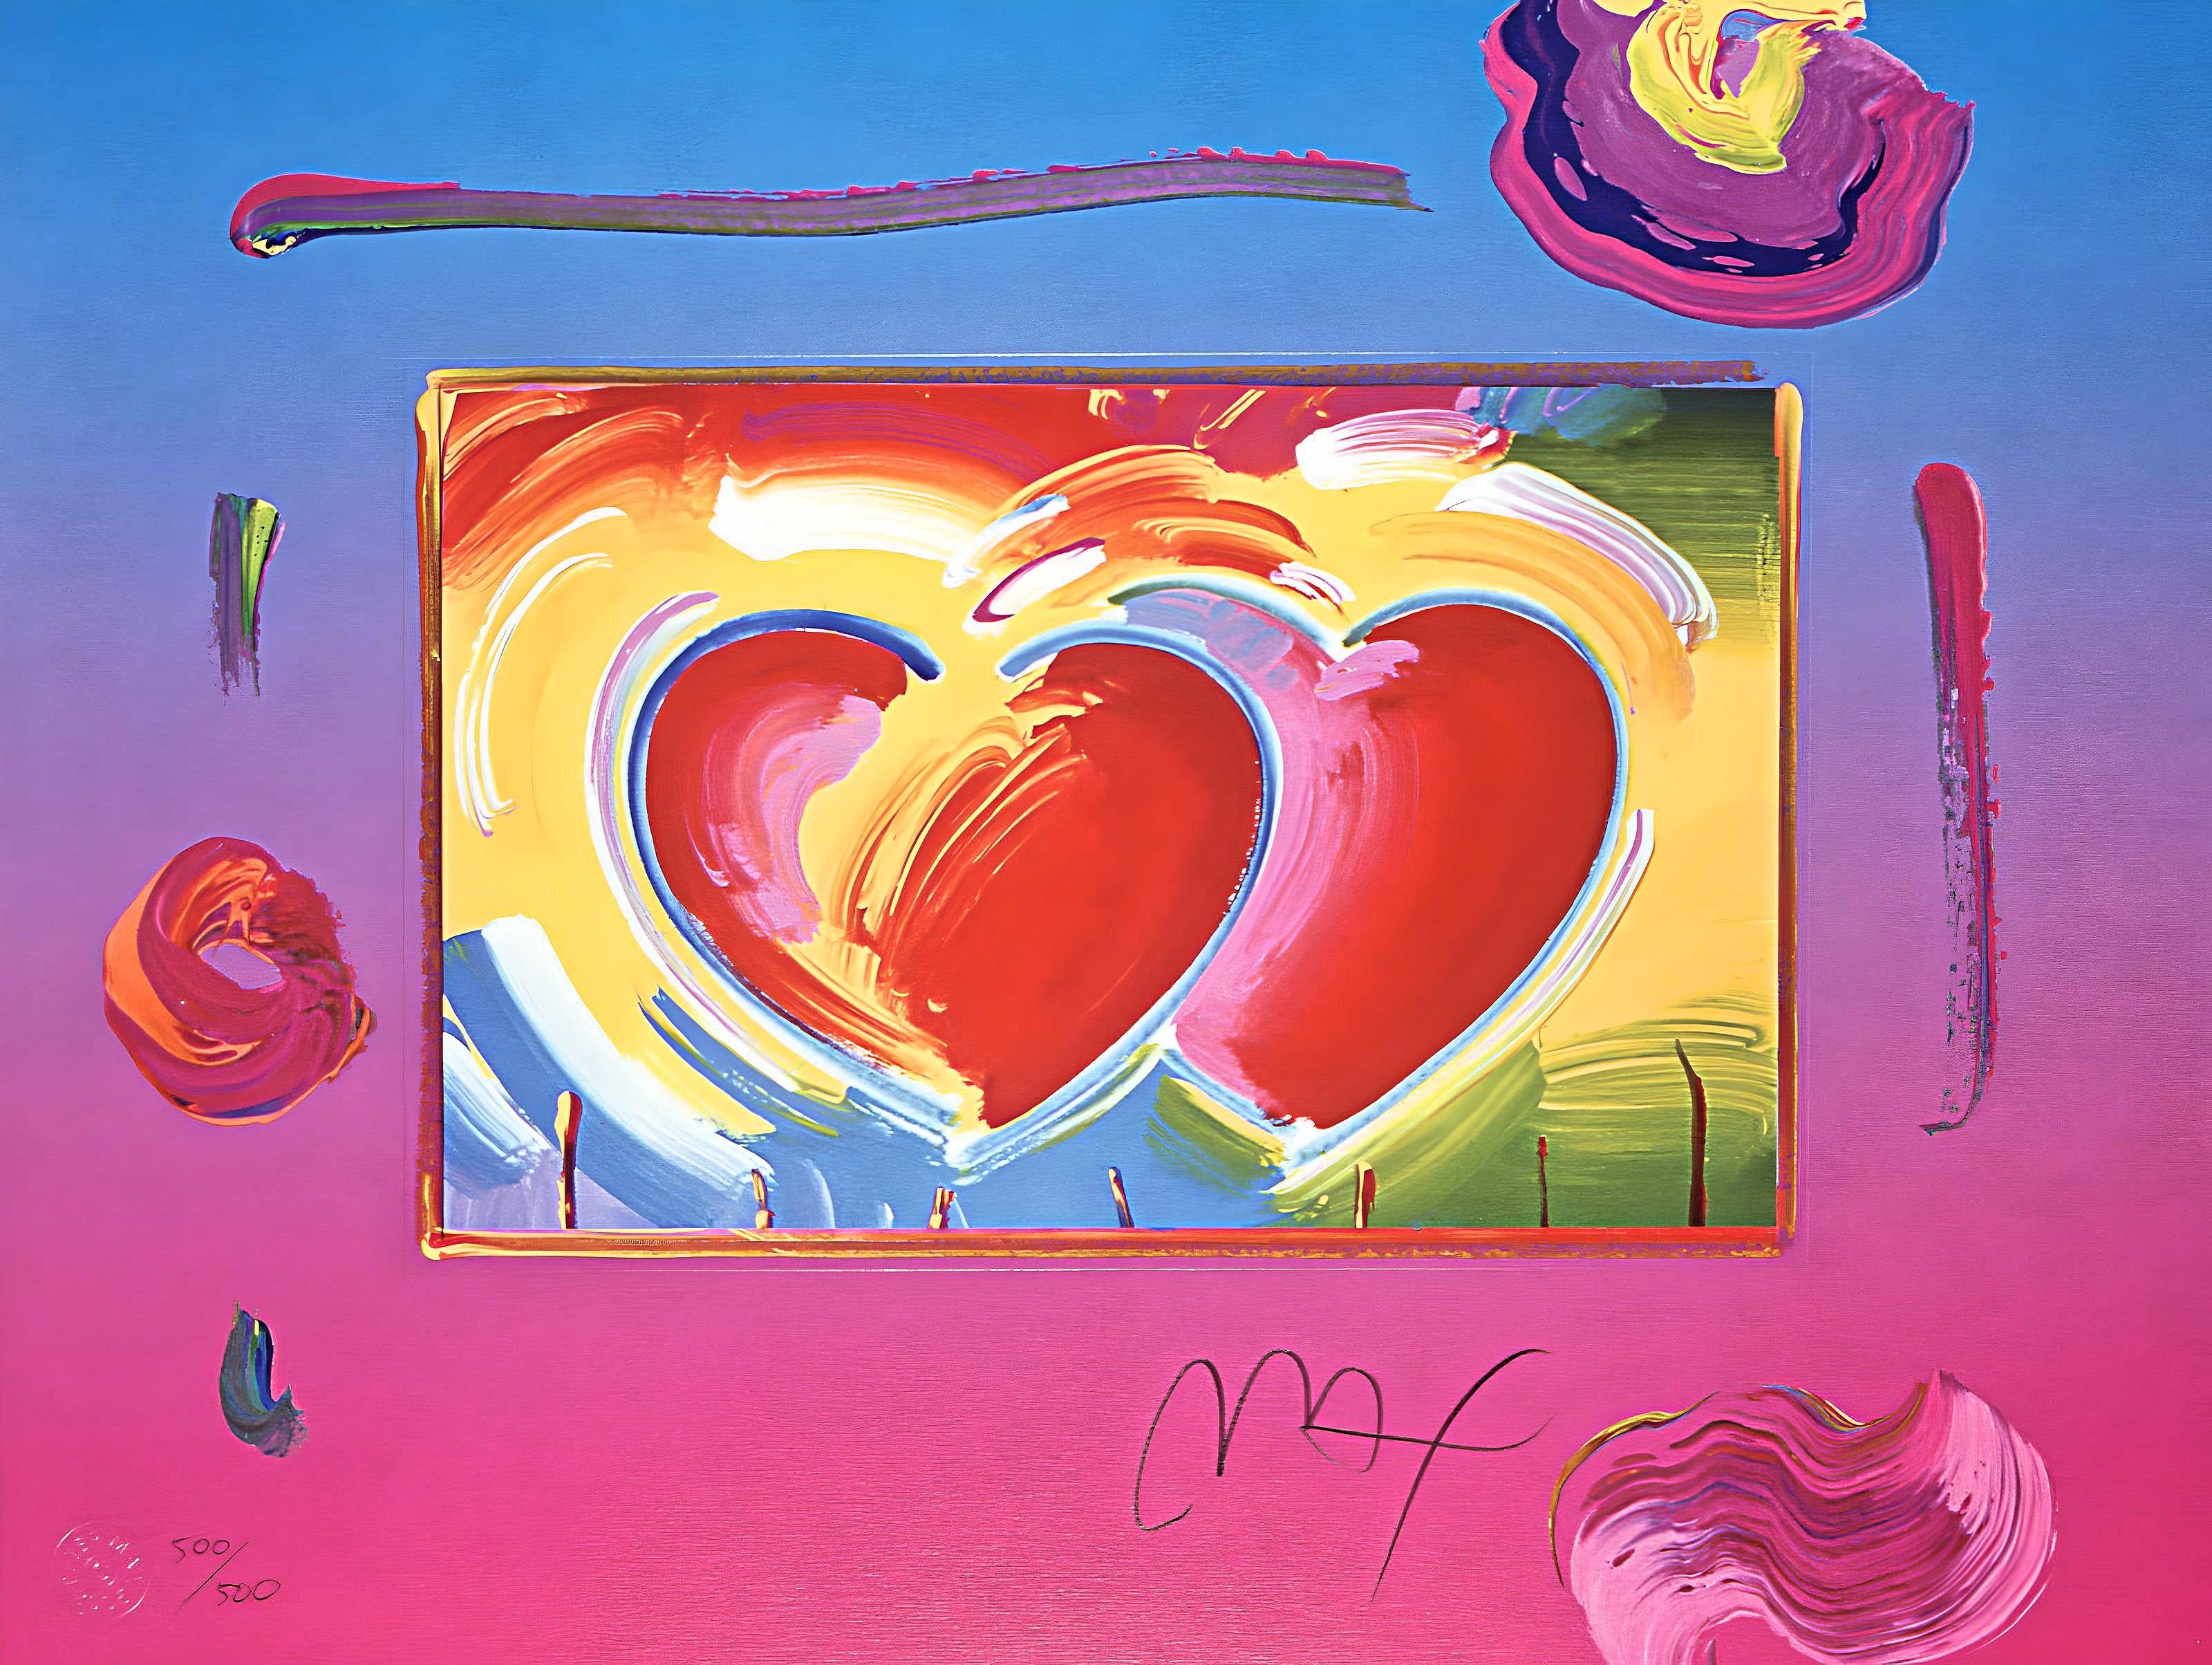 Artist: Peter Max (1937)
Title: Two Hearts on Blends
Year: 2005
Edition: 500/500, plus proofs
Medium: Lithograph on Lustro Saxony paper
Size: 13 x 17 inches
Condition: Excellent
Inscription: Signed and numbered by the artist
Notes: Published by Via